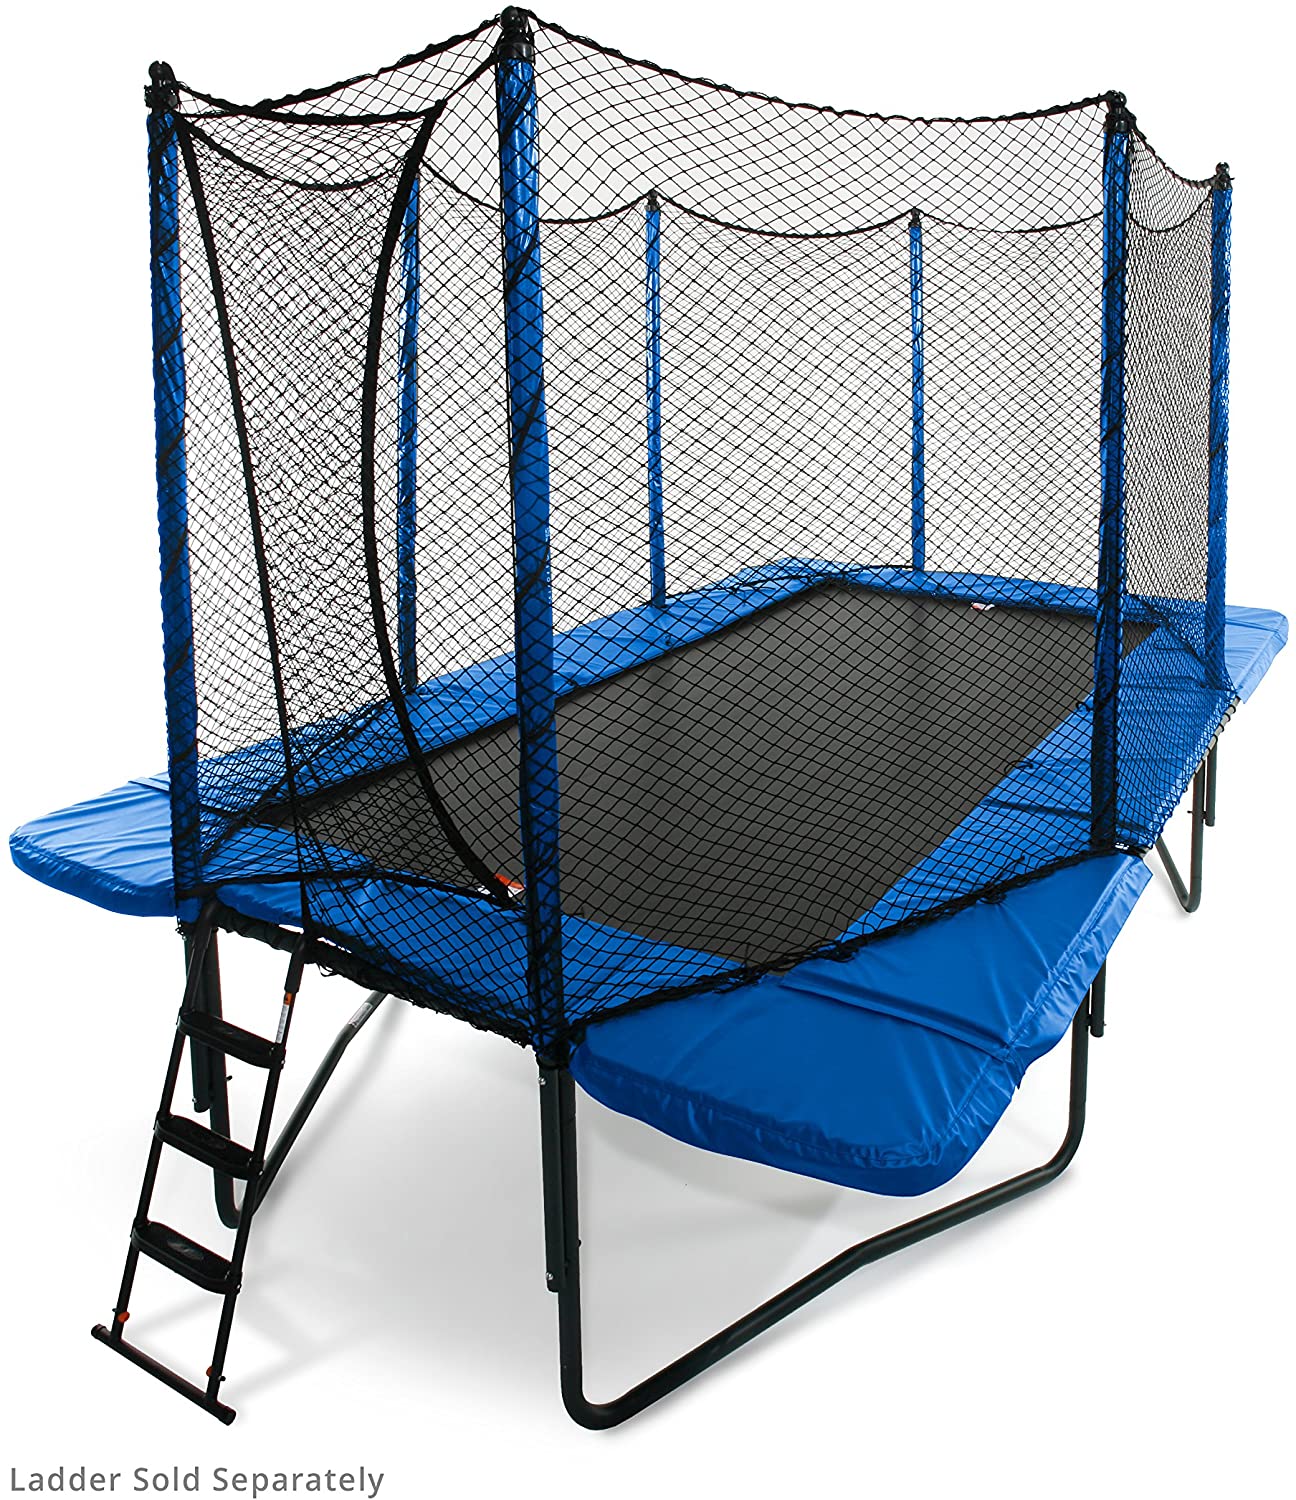 JumpSport 10' x 17' StagedBounce Trampoline with Safety Enclosure